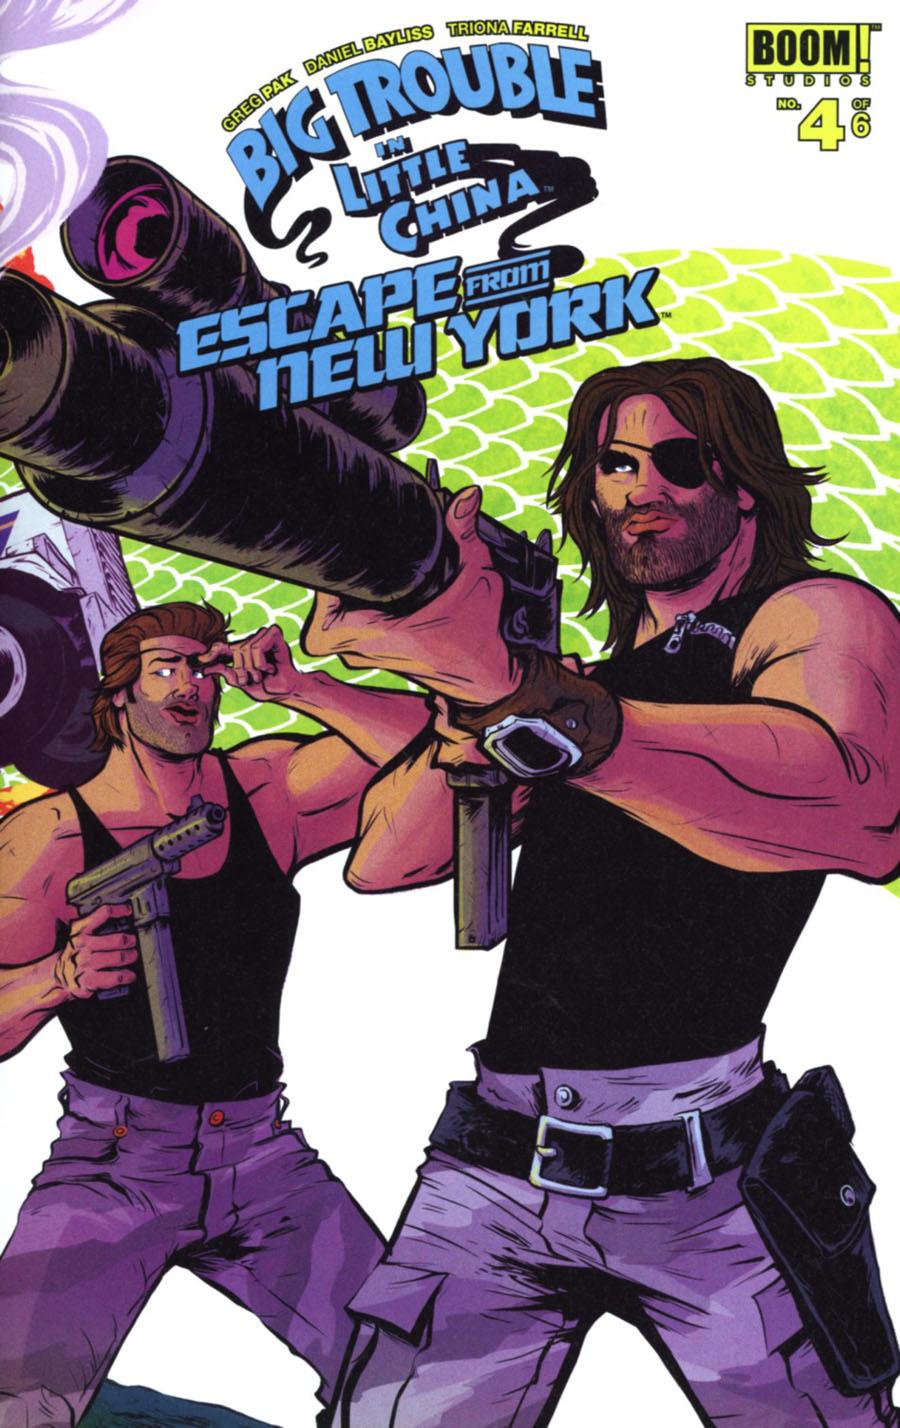 Big Trouble In Little China Escape From New York Vol. 1 #4